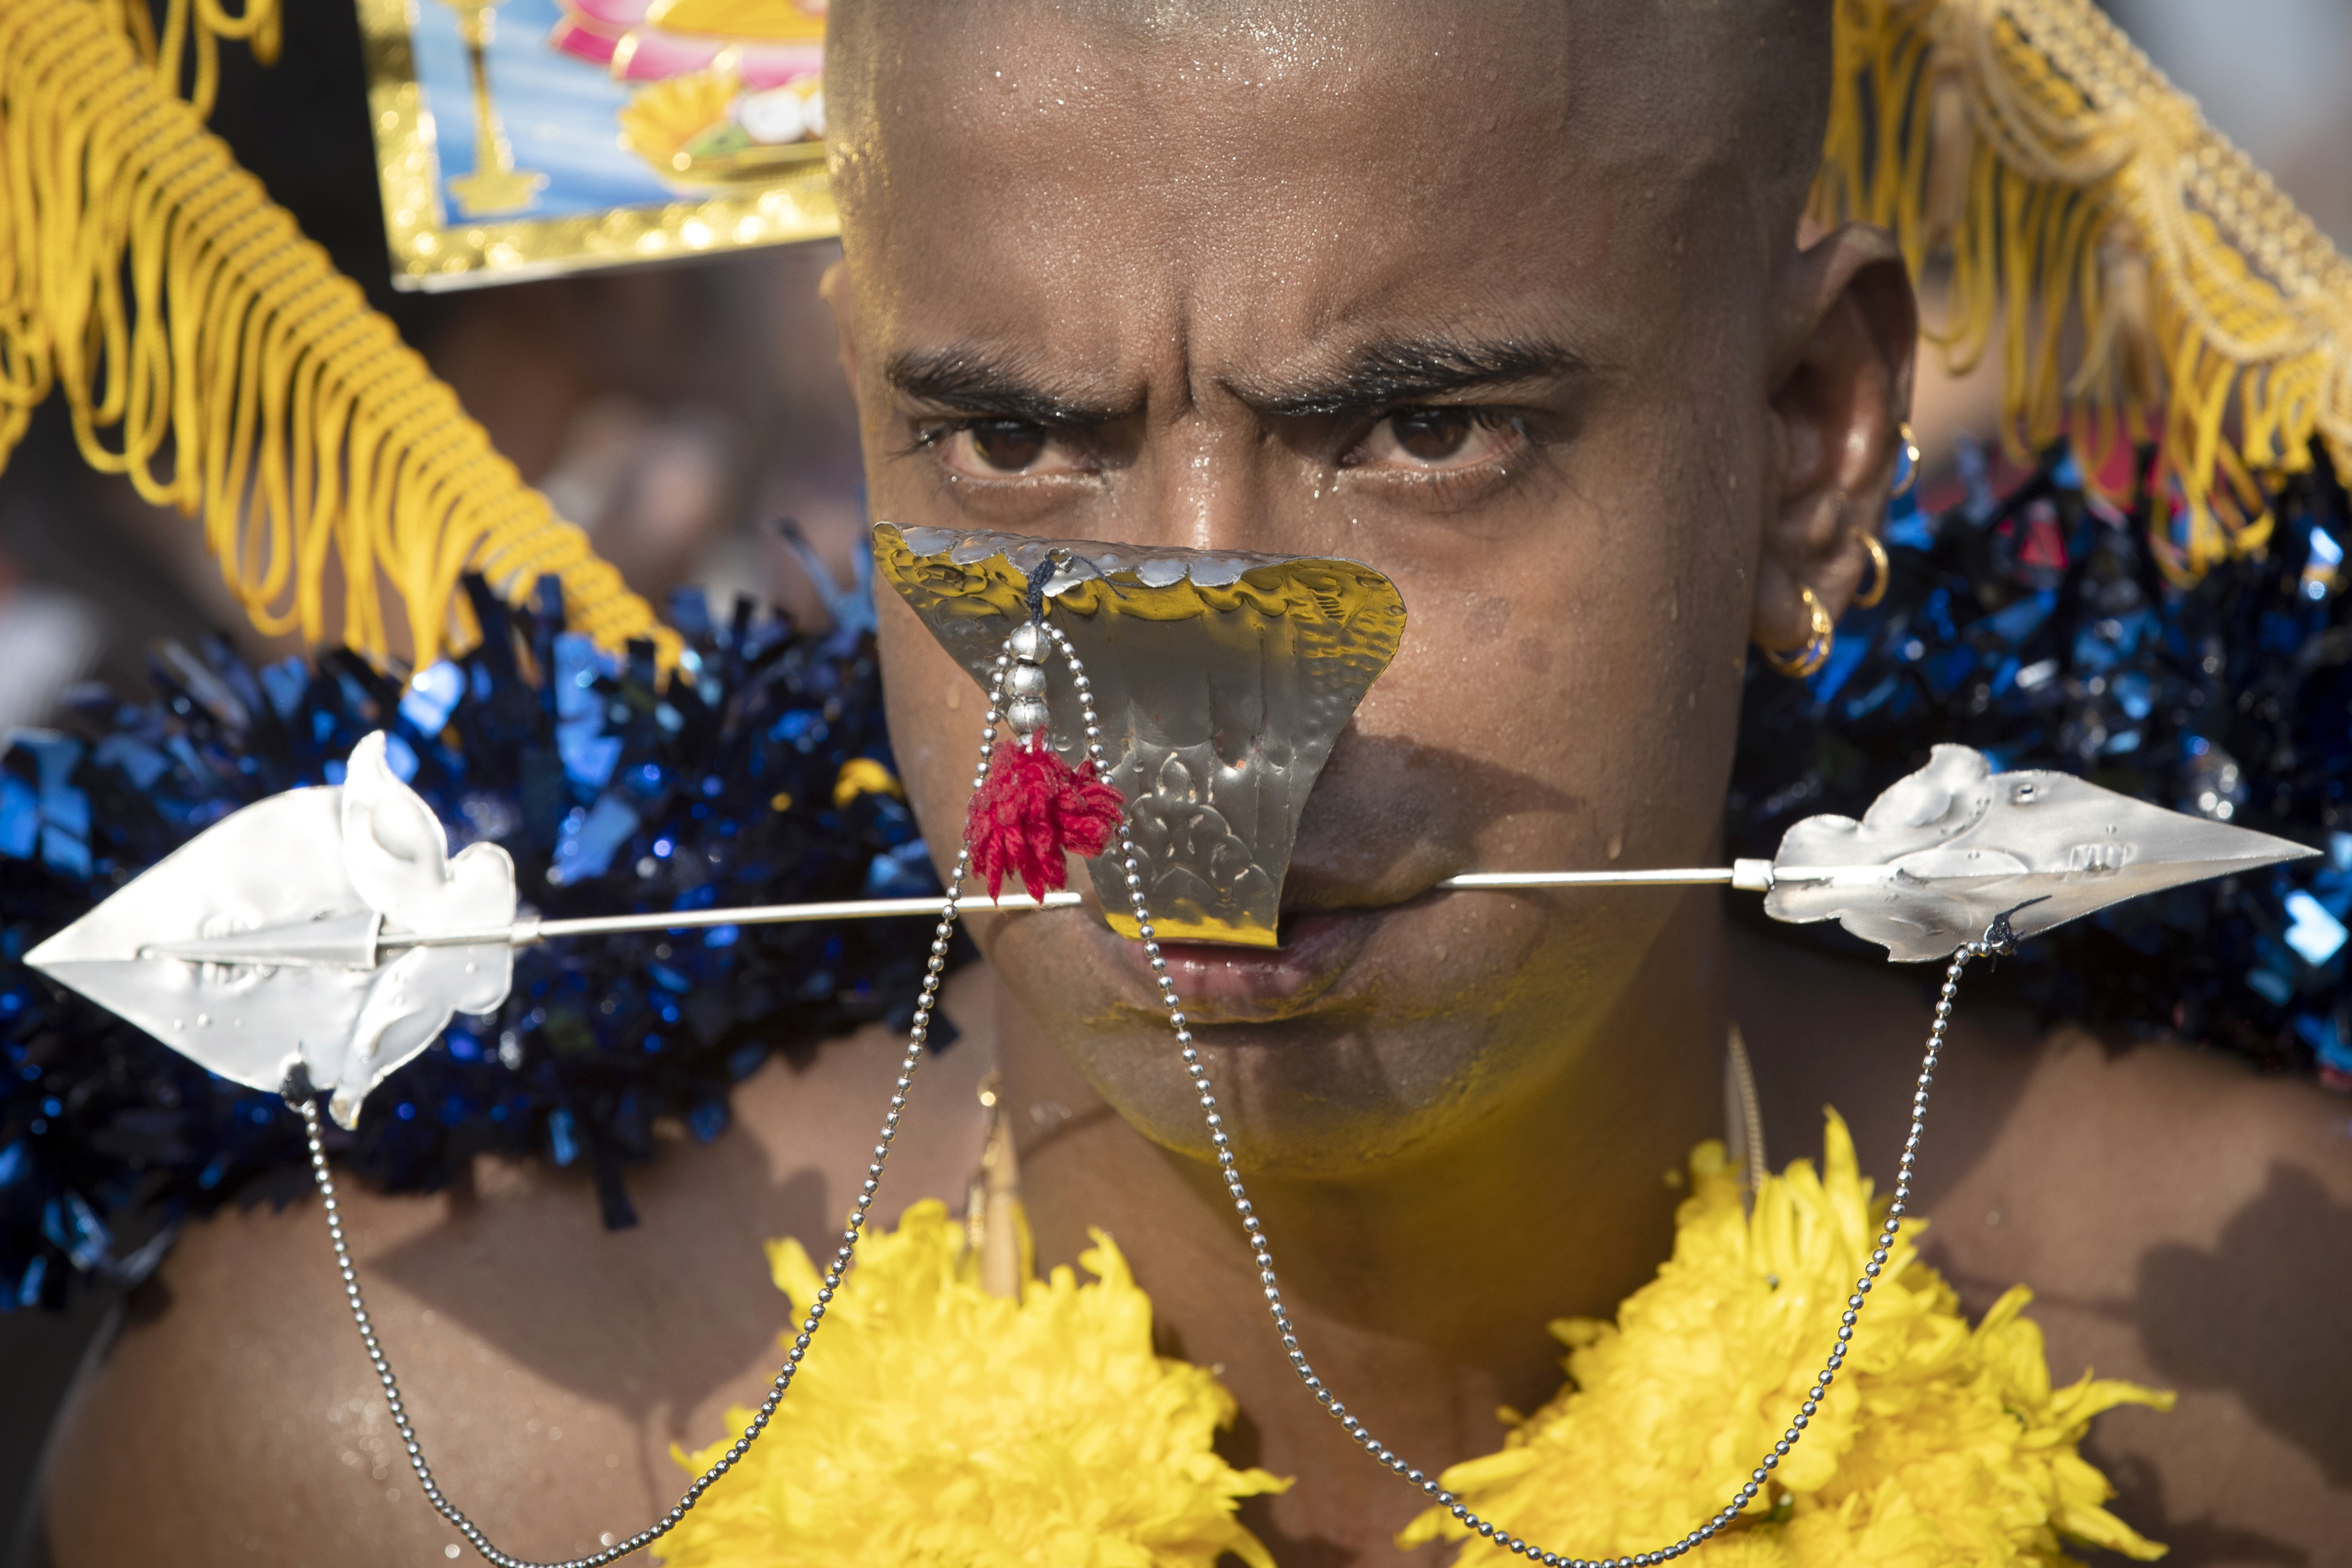 A Hindu devotee carries a Kavadi offering cage with his cheek pierced with a metal rod in a procession during the Thaipusam festival at Batu Caves in Kuala Lumpur, Malaysia, Monday, Jan. 21, 2019. Thaipusam, which is celebrated in honor of Hindu god Lord Murugan, is an annual procession by Hindu devotees seeking blessings, fulfilling vows and offering thanks. (AP Photo/Vincent Thian)